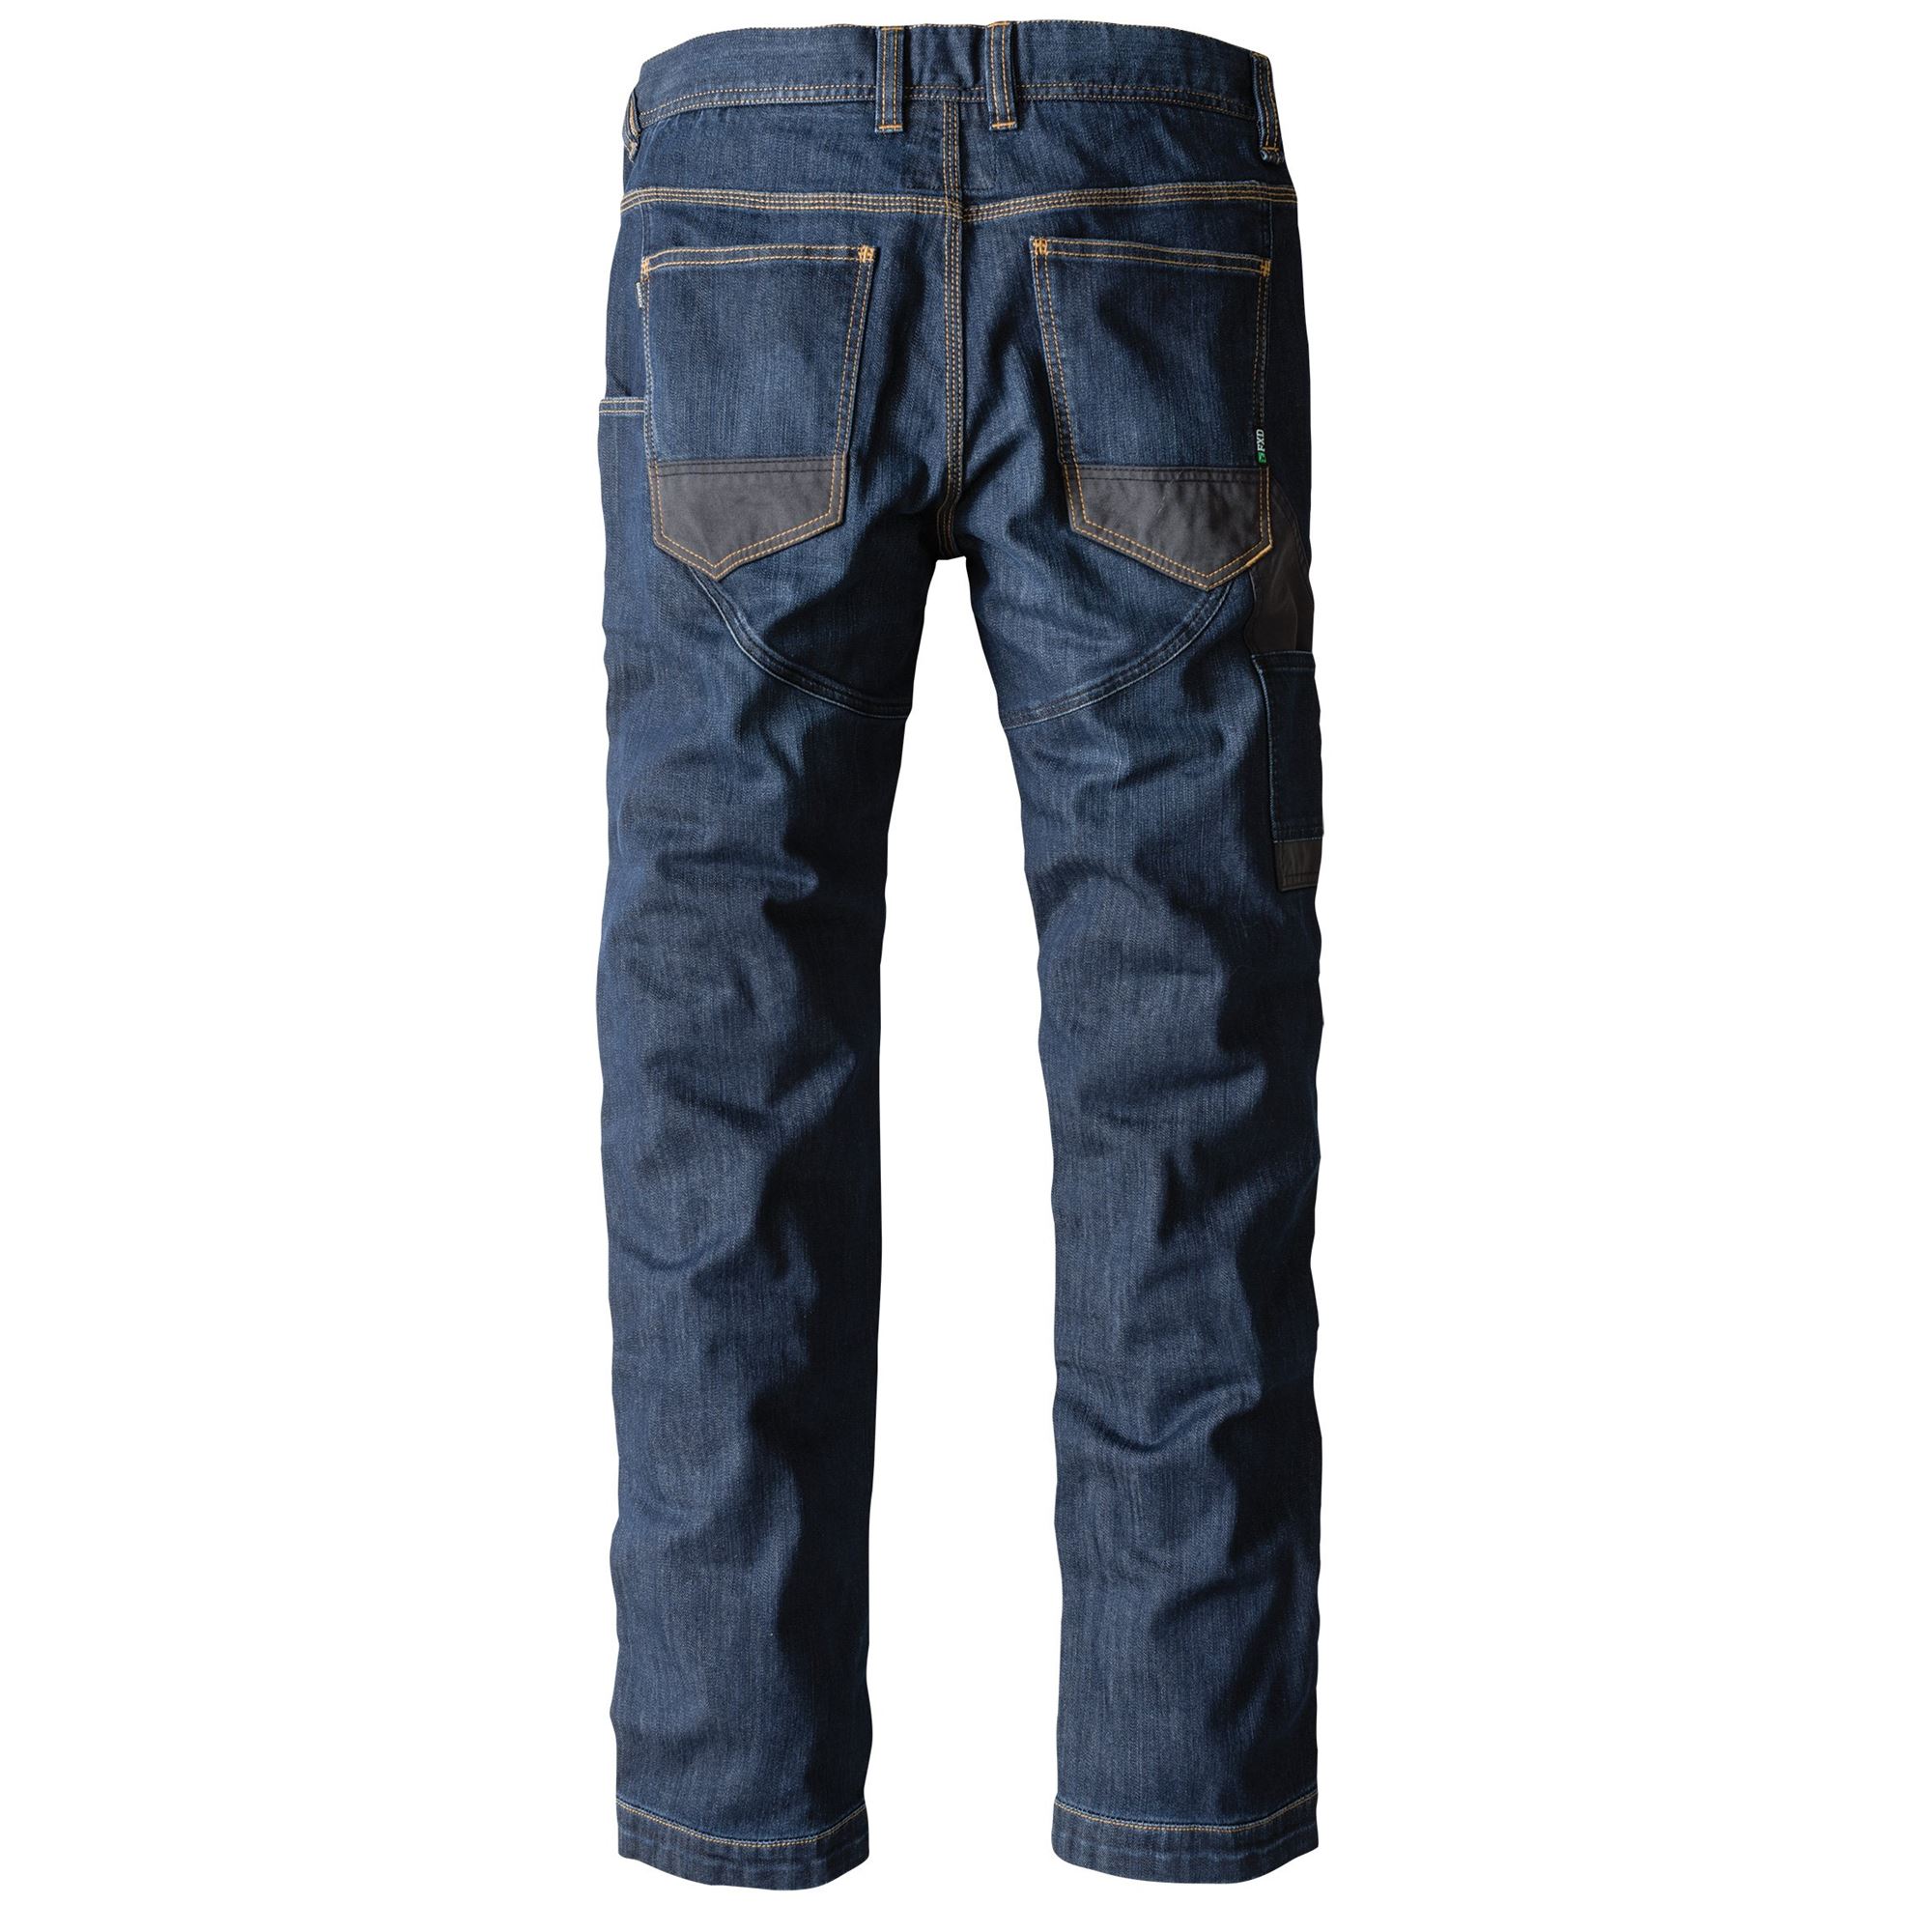 FXD WD-1 Denim Work Trousers with Knee Pad Pockets